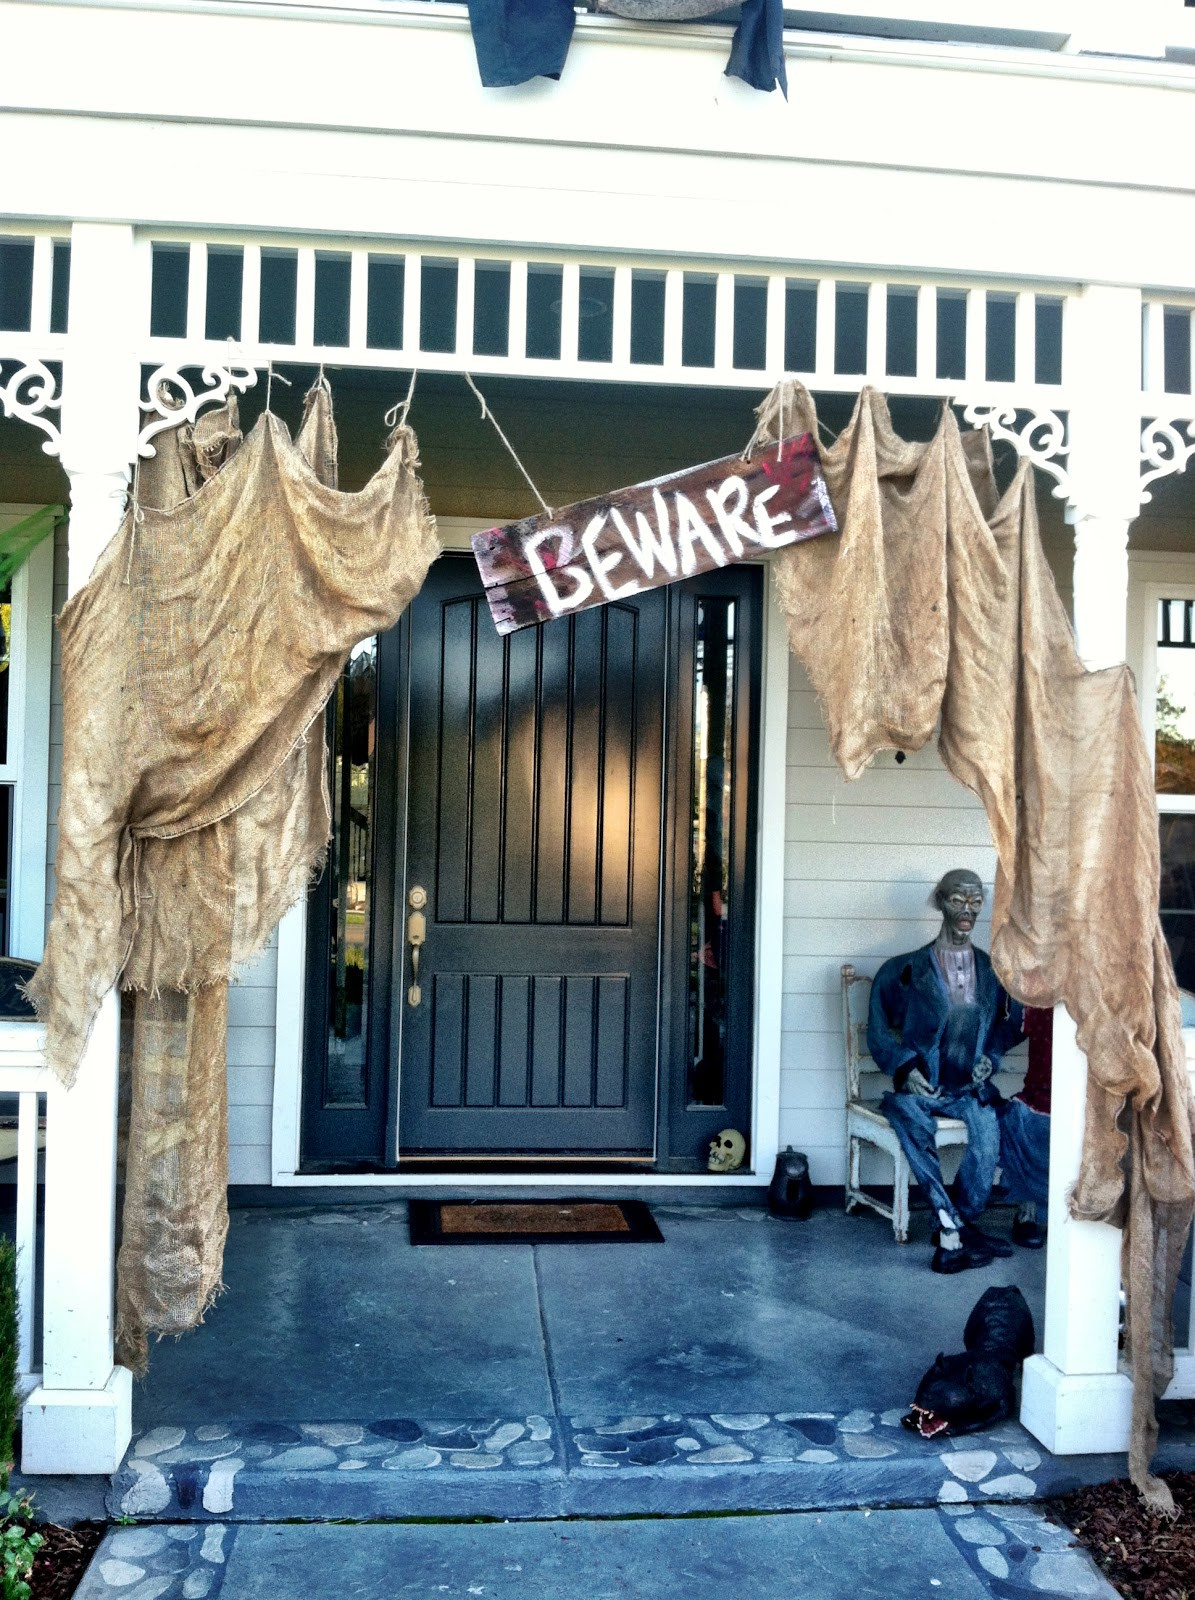 Porch Halloween Decor
 How to Halloween Curb Appeal